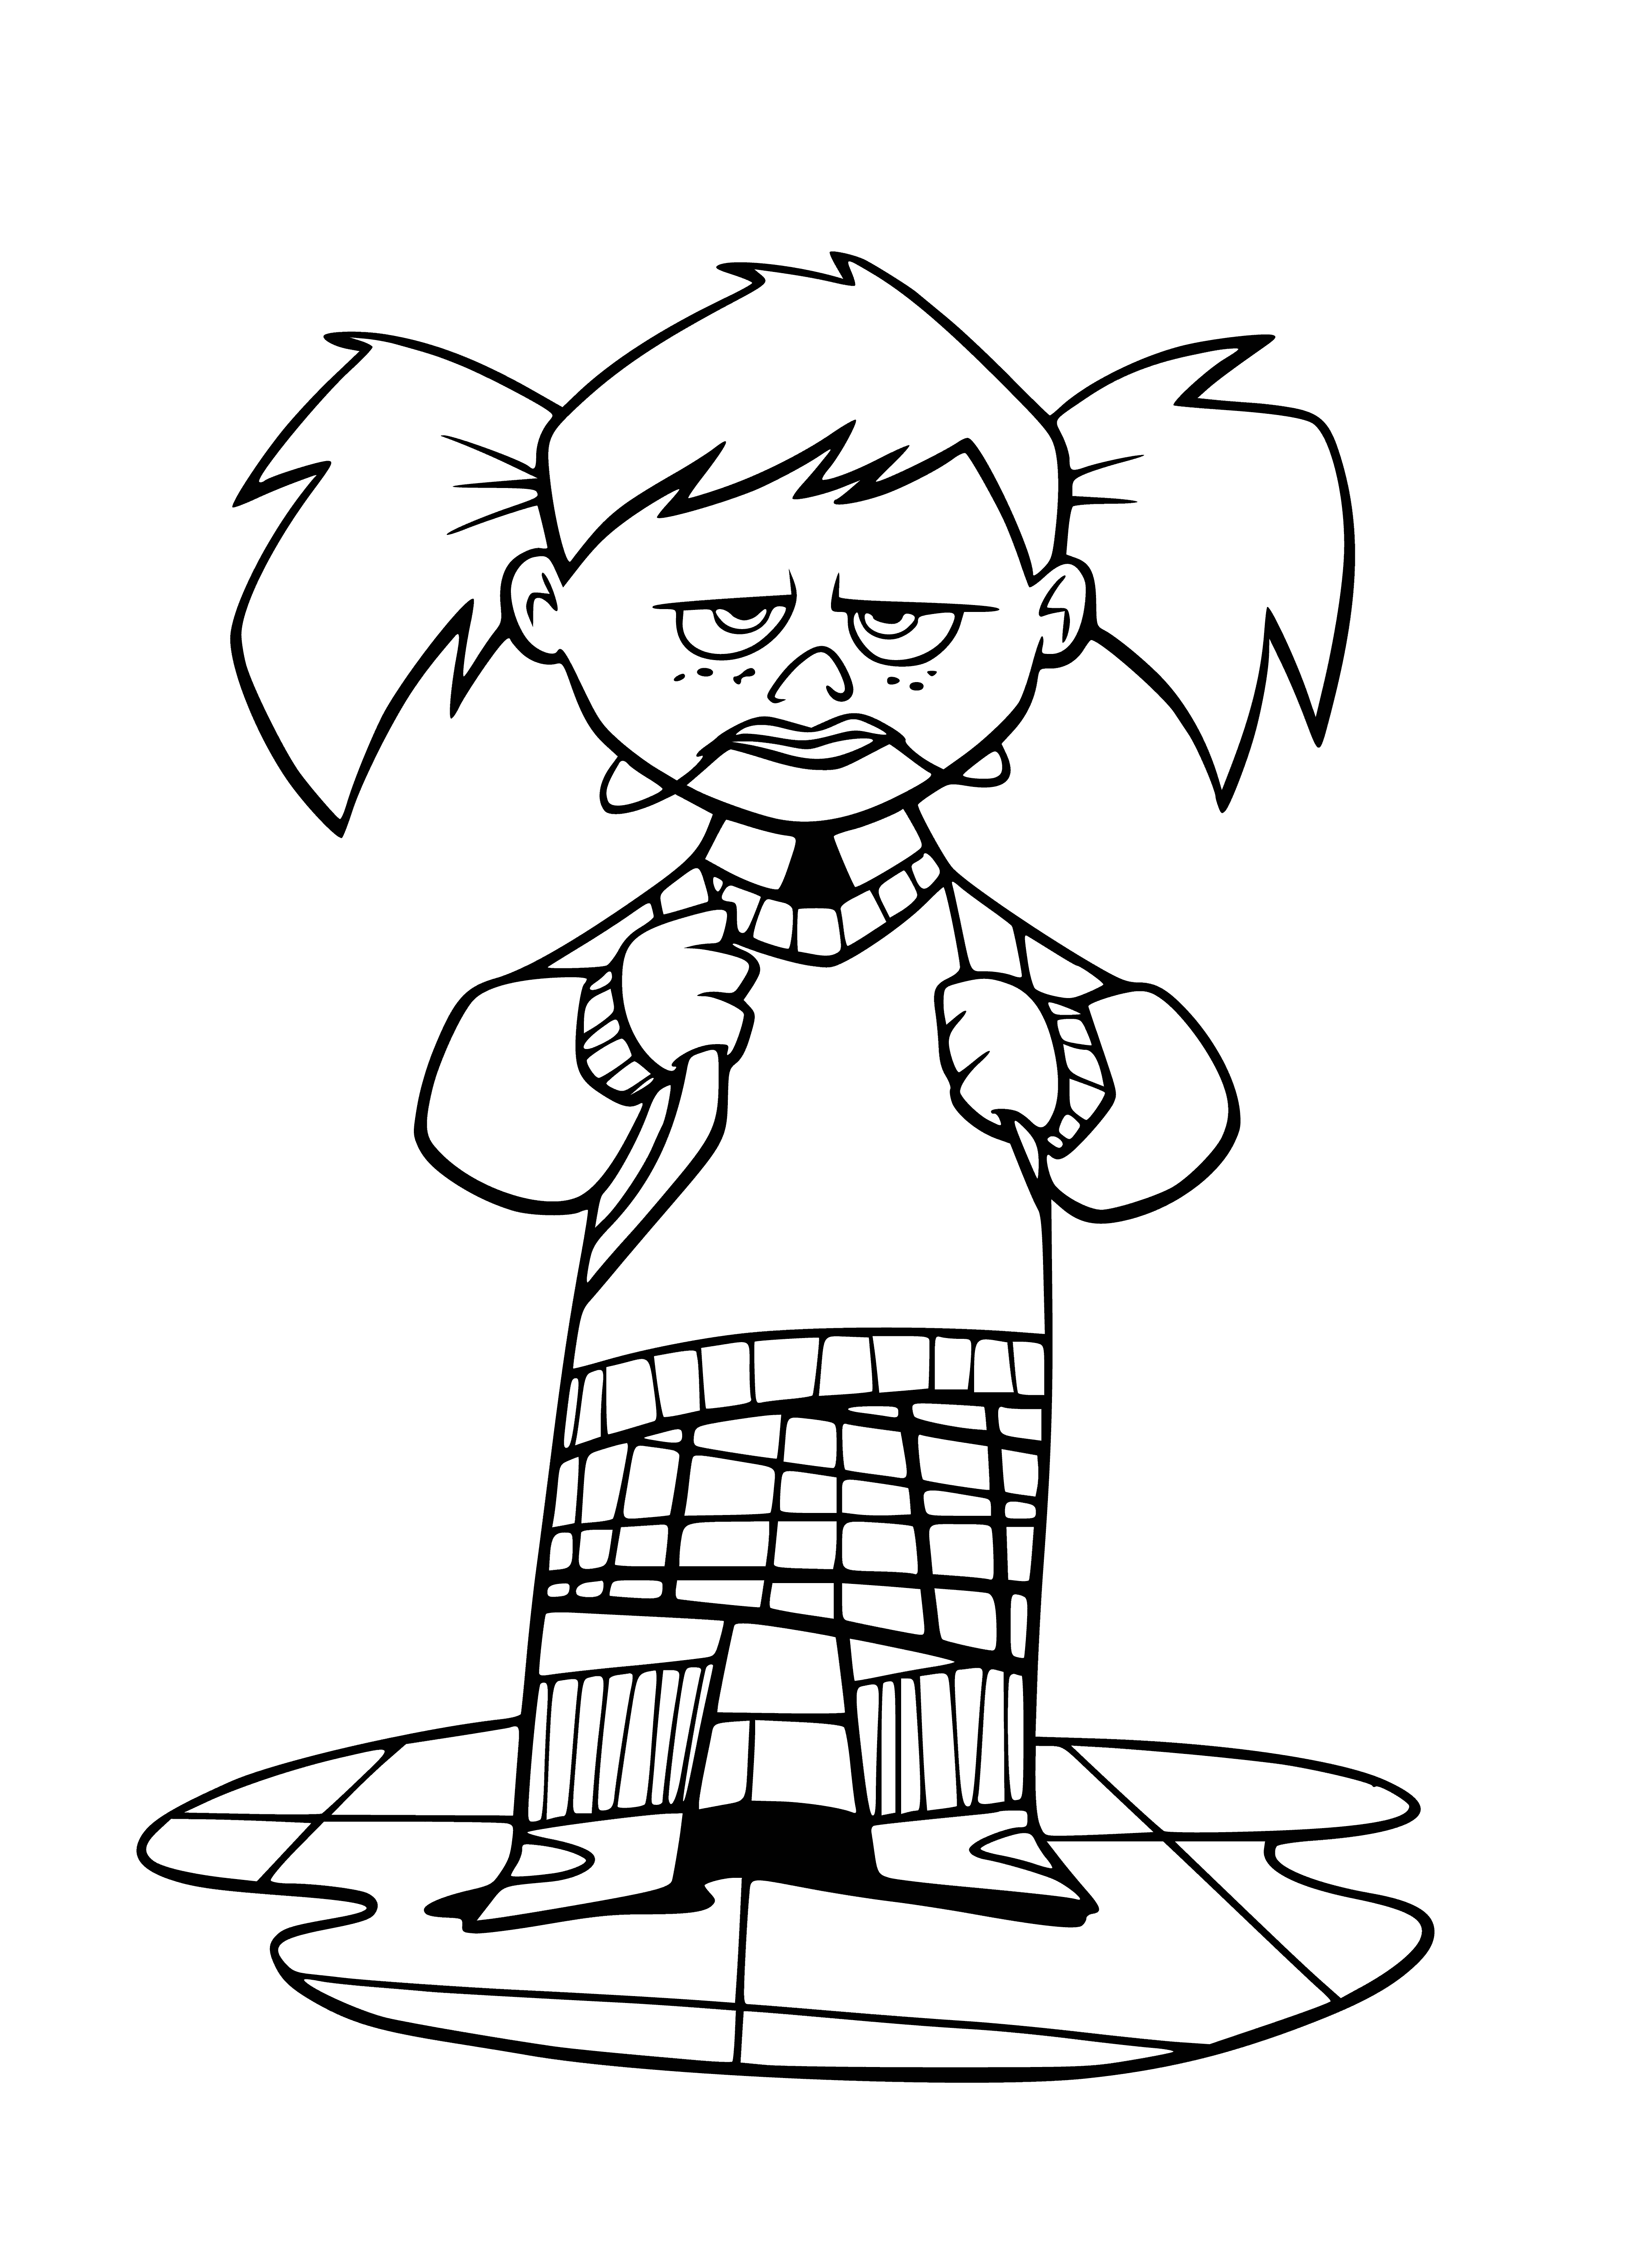 Evil girl coloring page